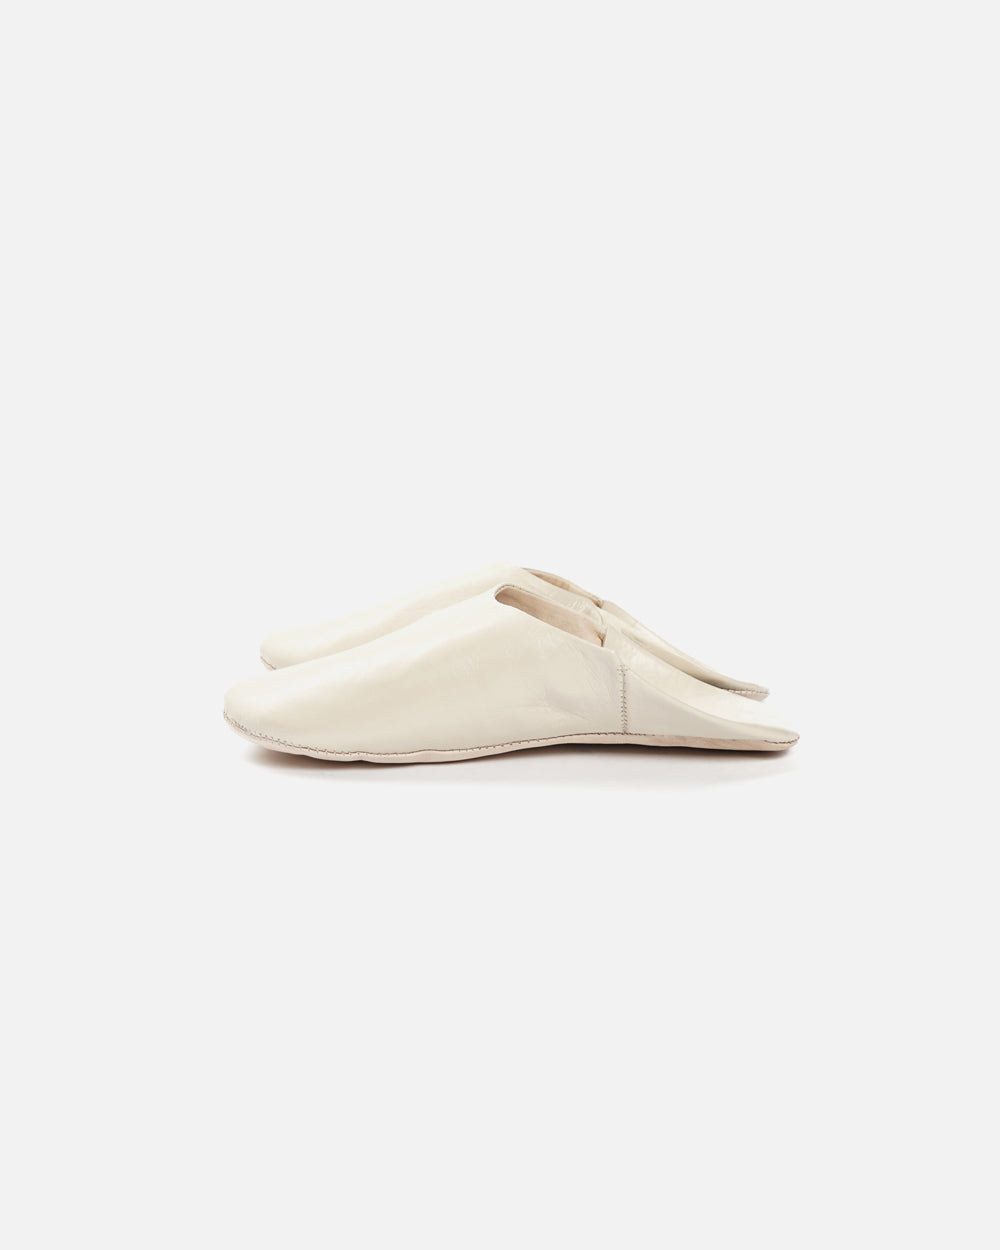 Moroccan Babouche Basic Slippers, White